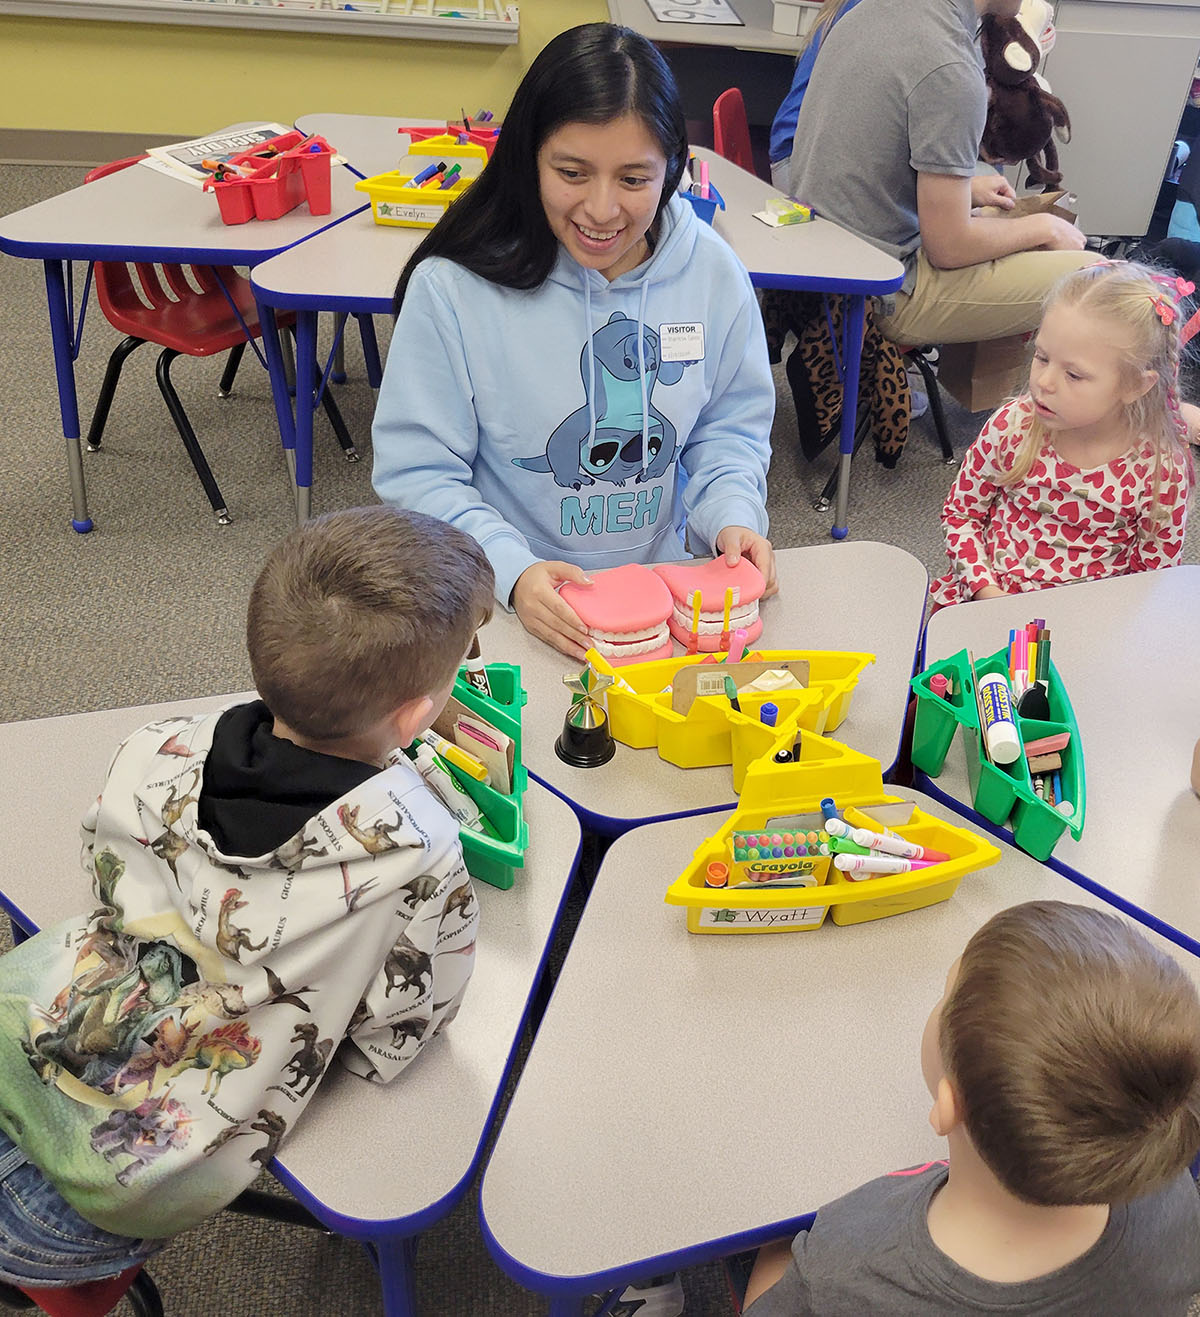 UNK senior Maritza Calmo Martin teaches Glenwood Elementary School kindergartners about oral health during a recent outreach event. Calmo Martin organizes these educational activities for local preschools and elementary schools. (UNK Health Sciences)